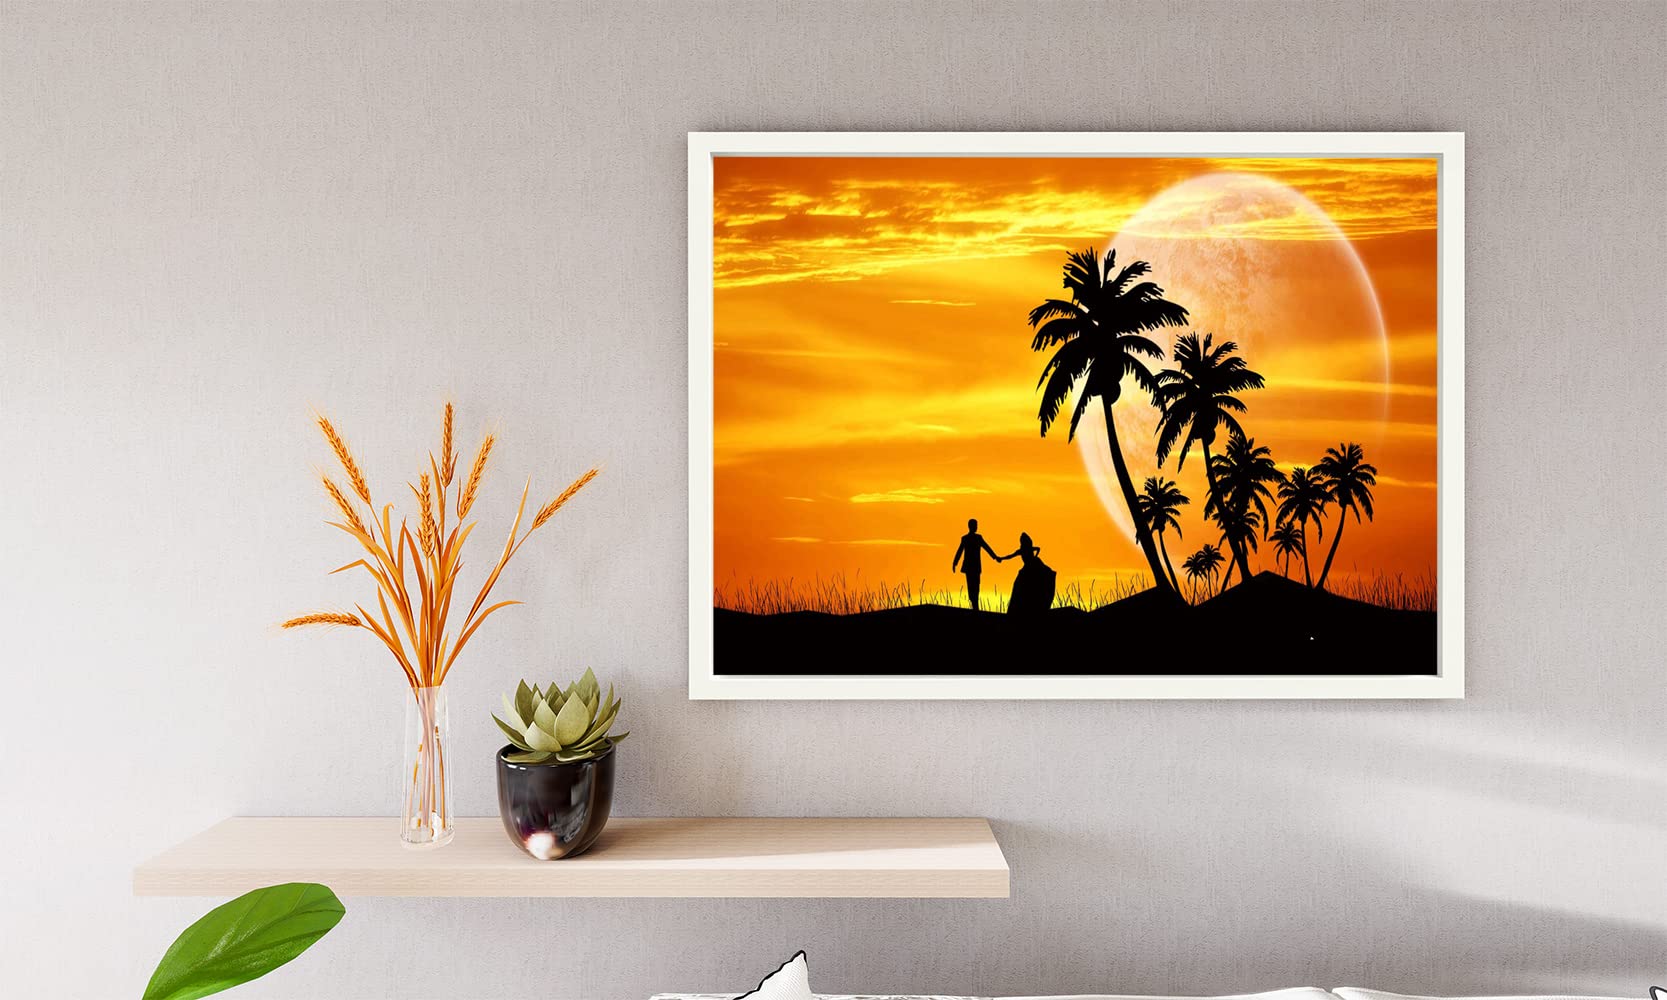 Review: The Best Wall Art for Your Home